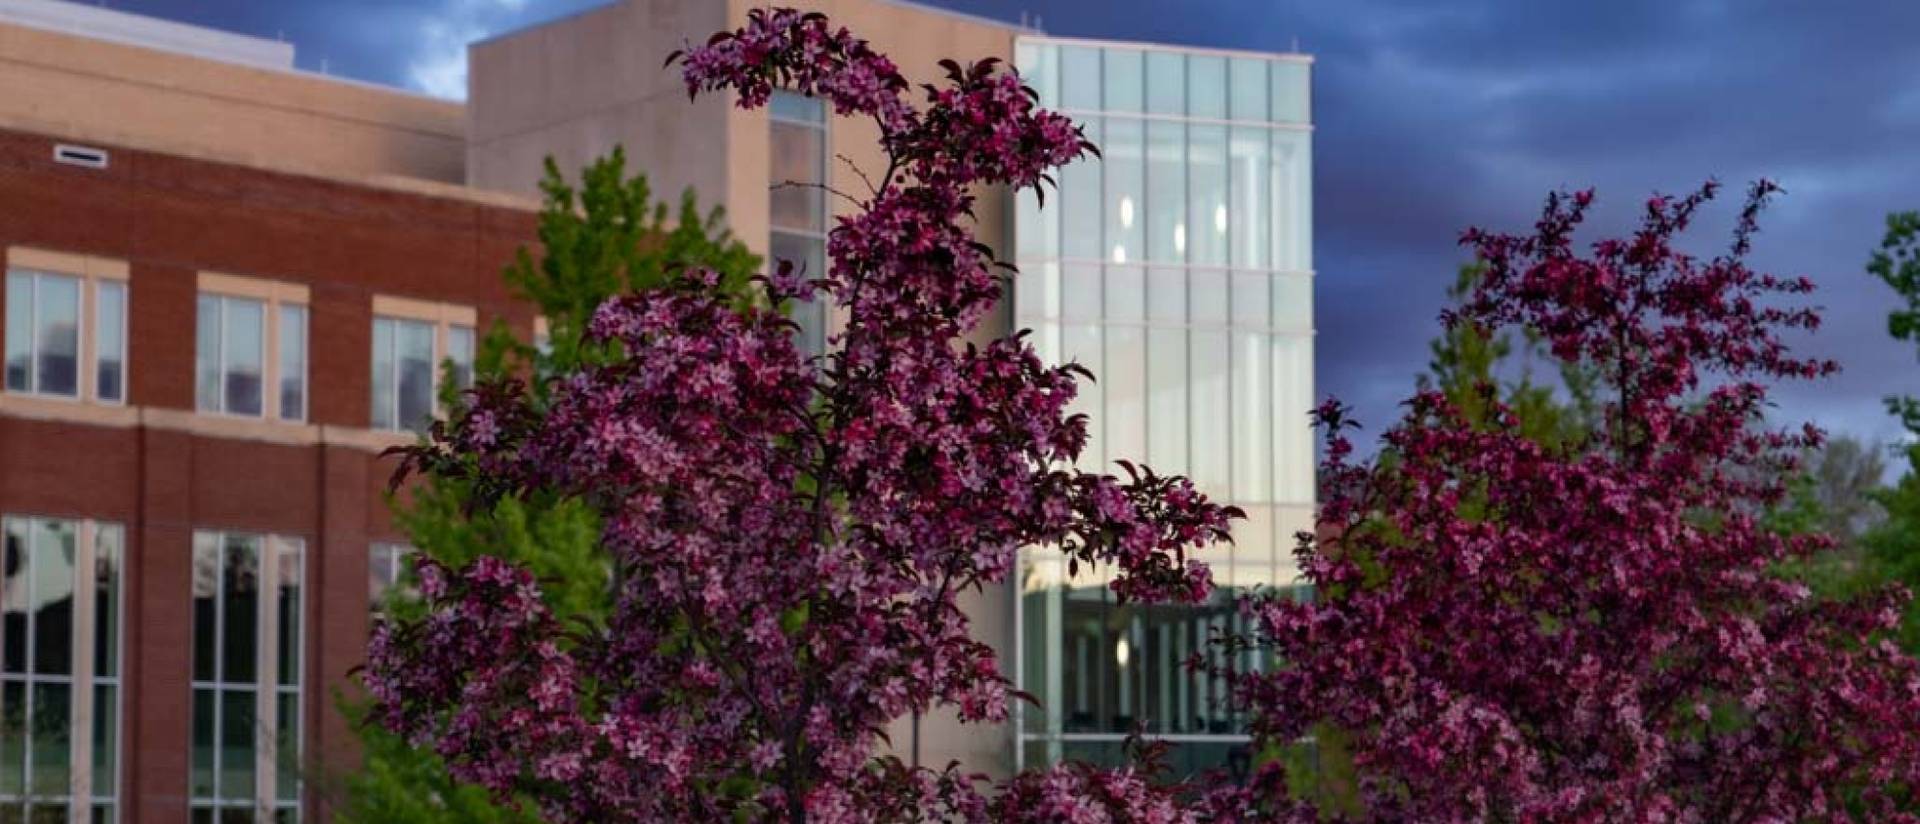 Flowering trees with Centennial Hall in background